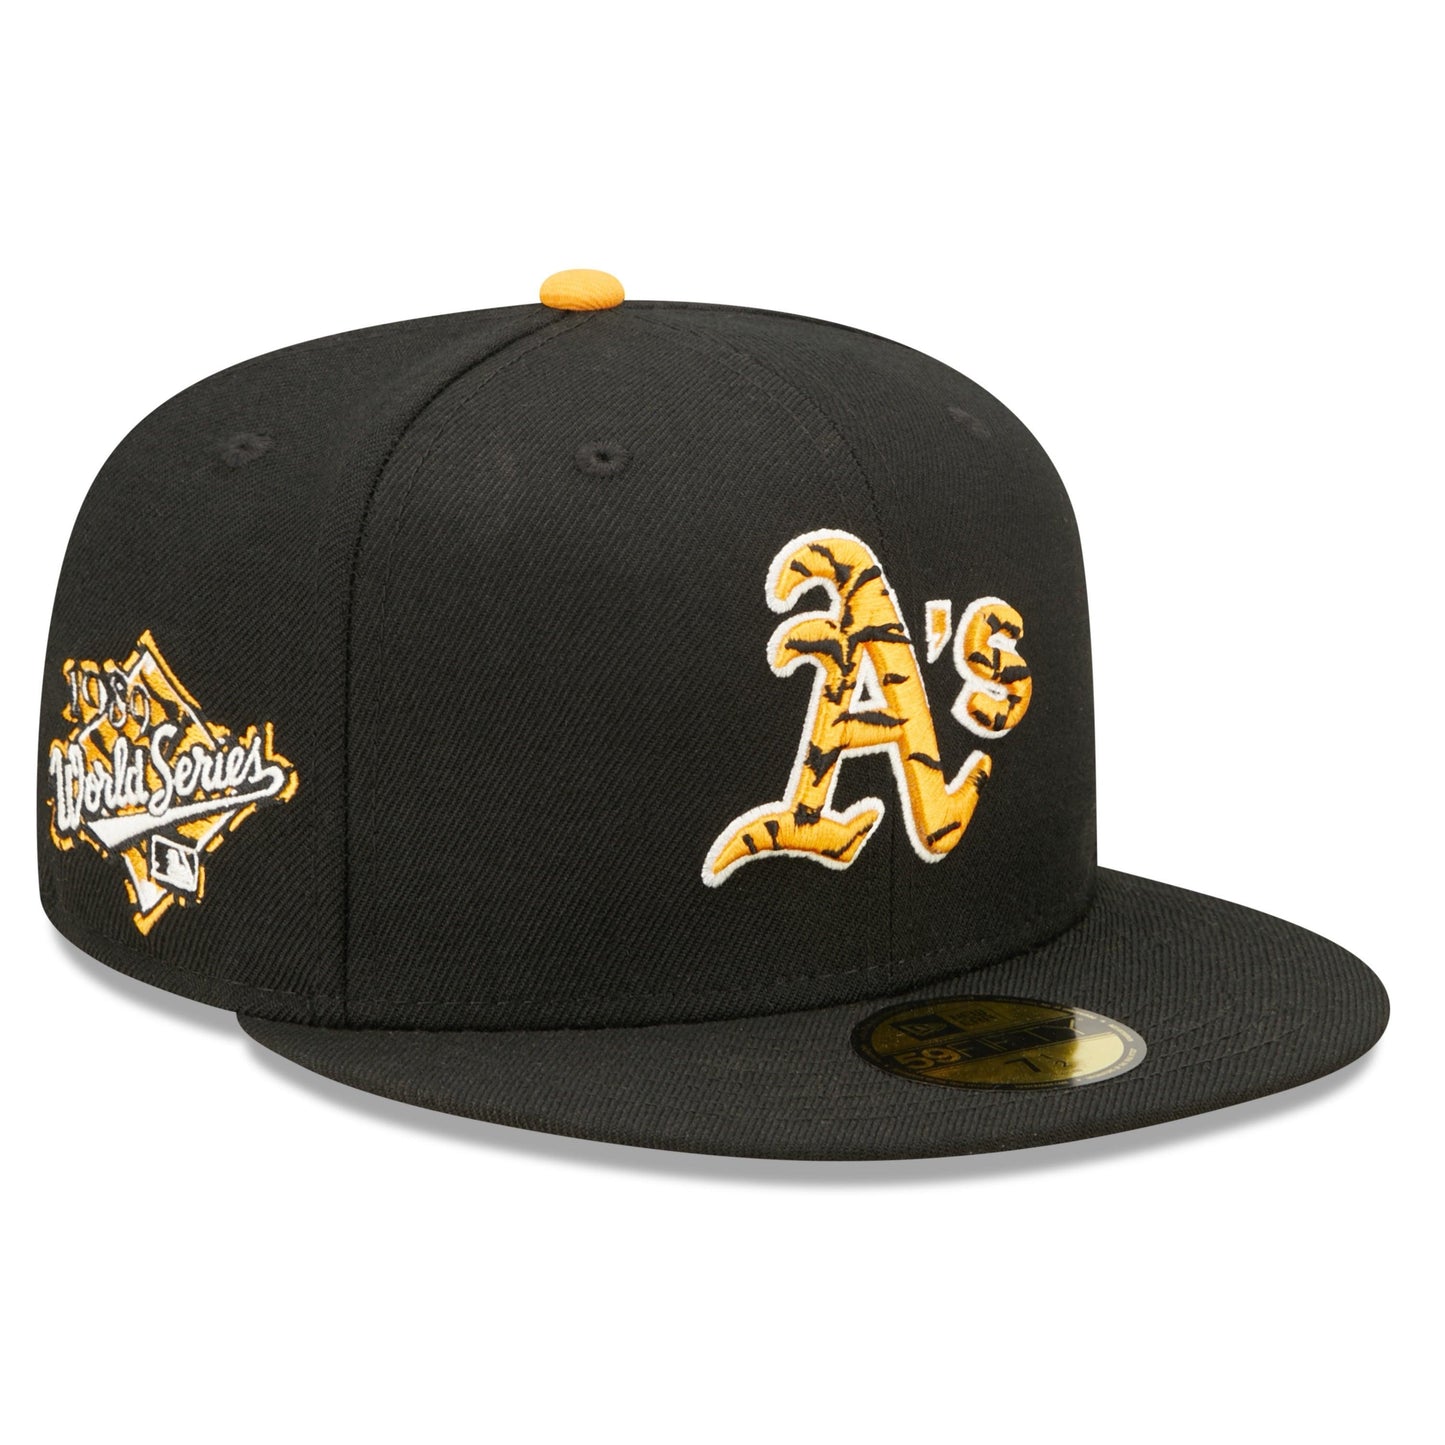 NEW ERA 59FIFTY WORLD SERIES 1989 MLB OAKLAND ATHLETICS TIGERFILL FITTED CAP